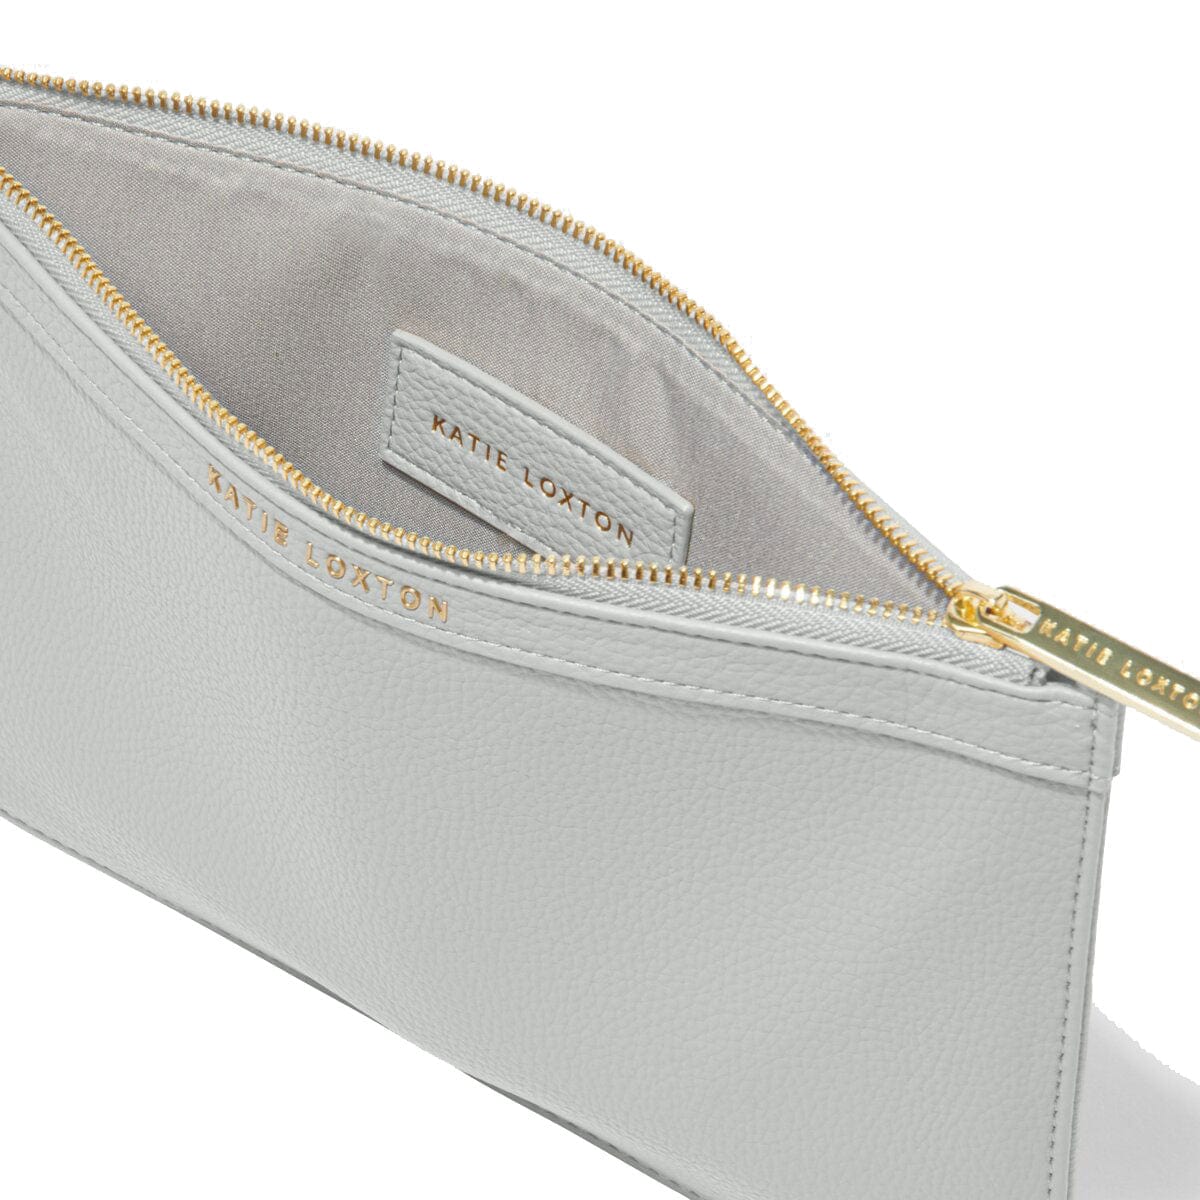 Katie Loxton Pouch Katie Loxton Cleo Pouch